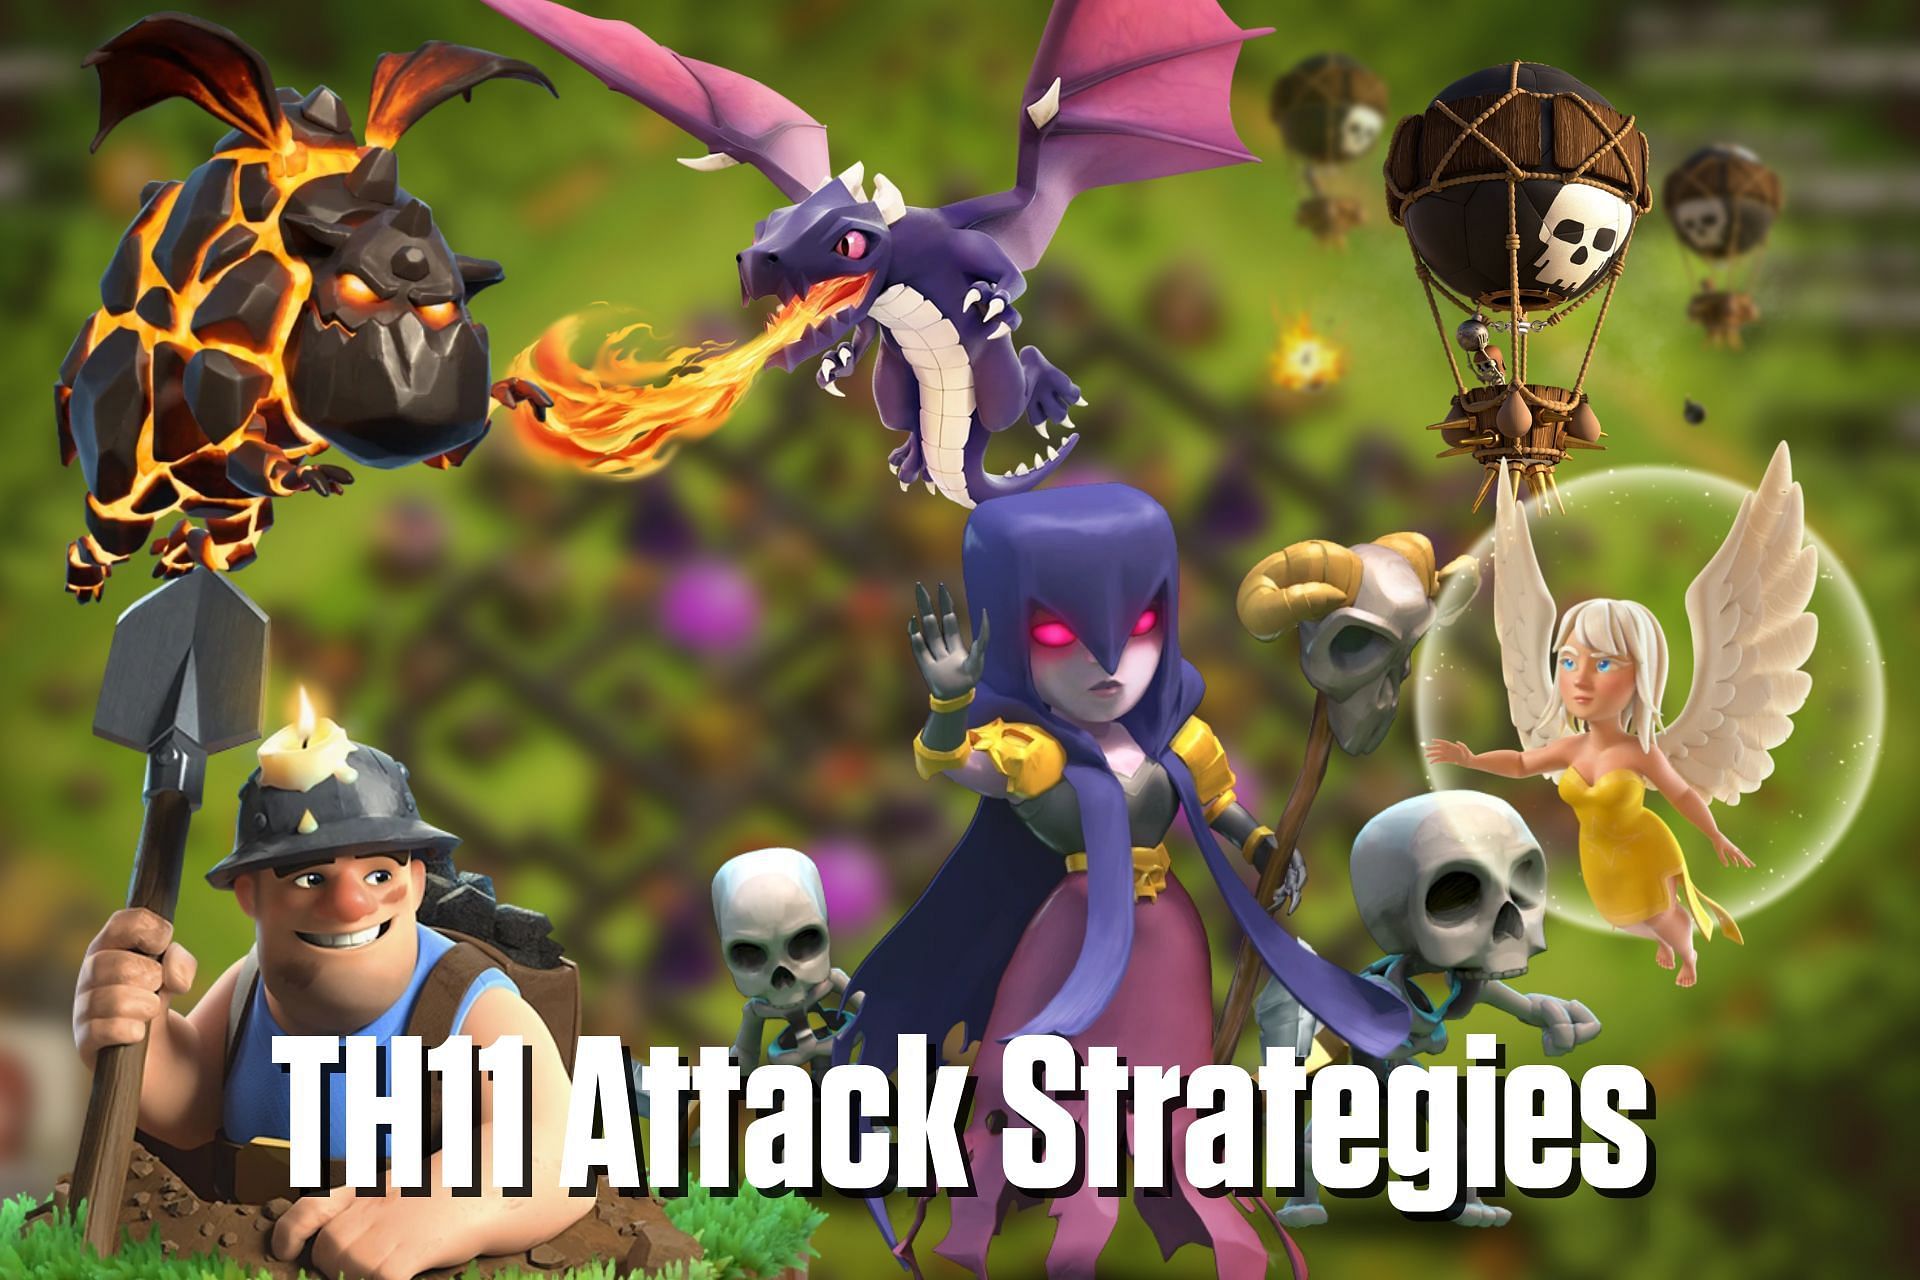 Top 5 attack combinations for Town Hall 11 in Clash of Clans